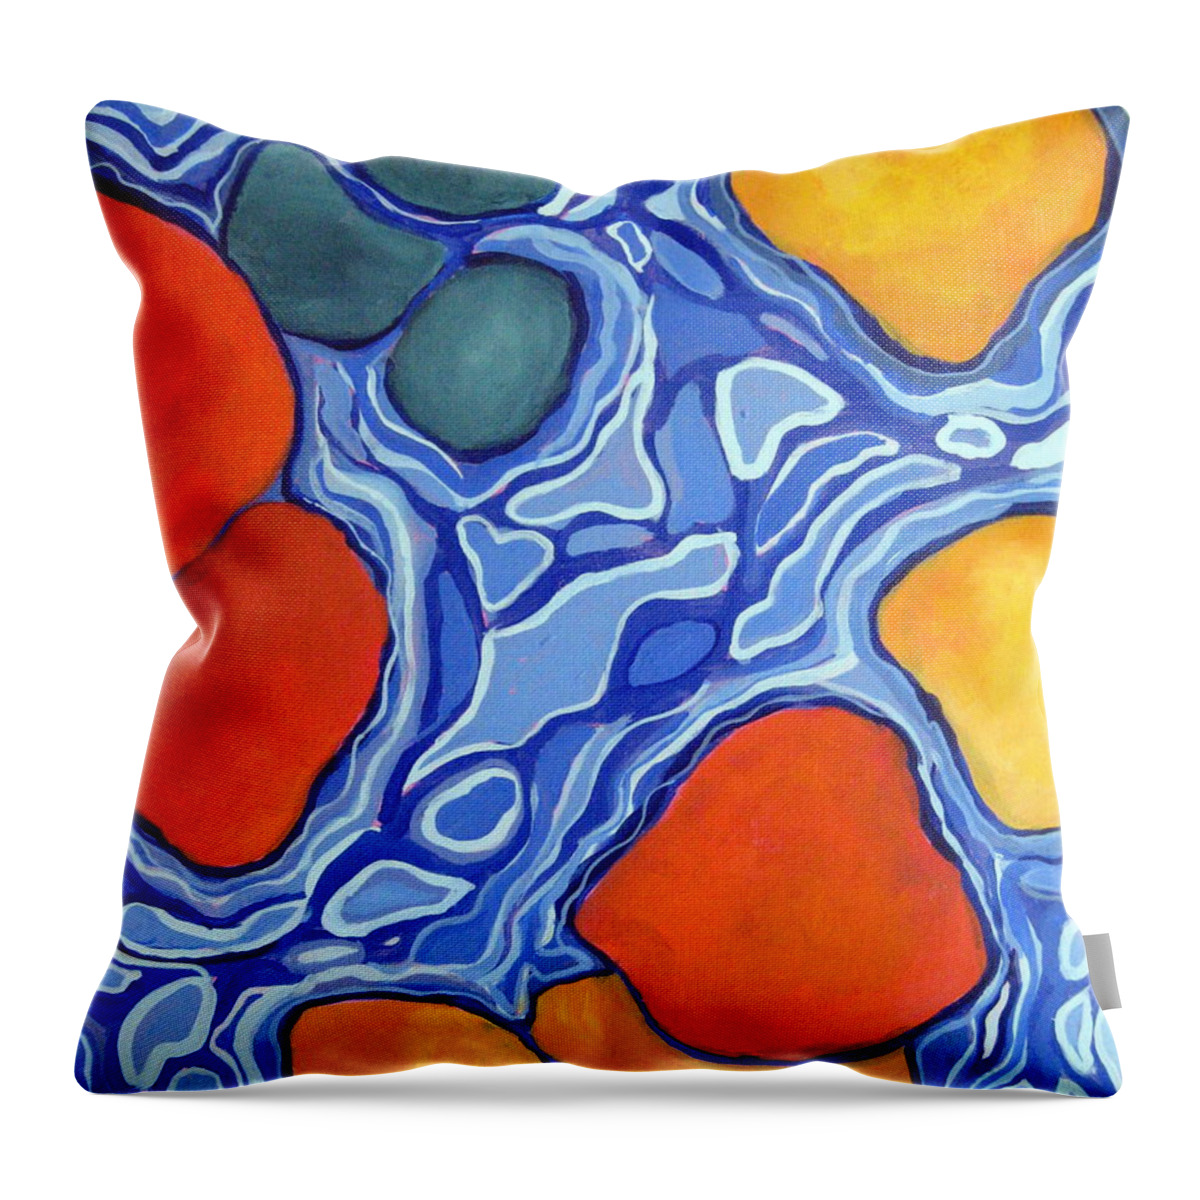 Vivid Throw Pillow featuring the painting Celebrate by Edy Ottesen